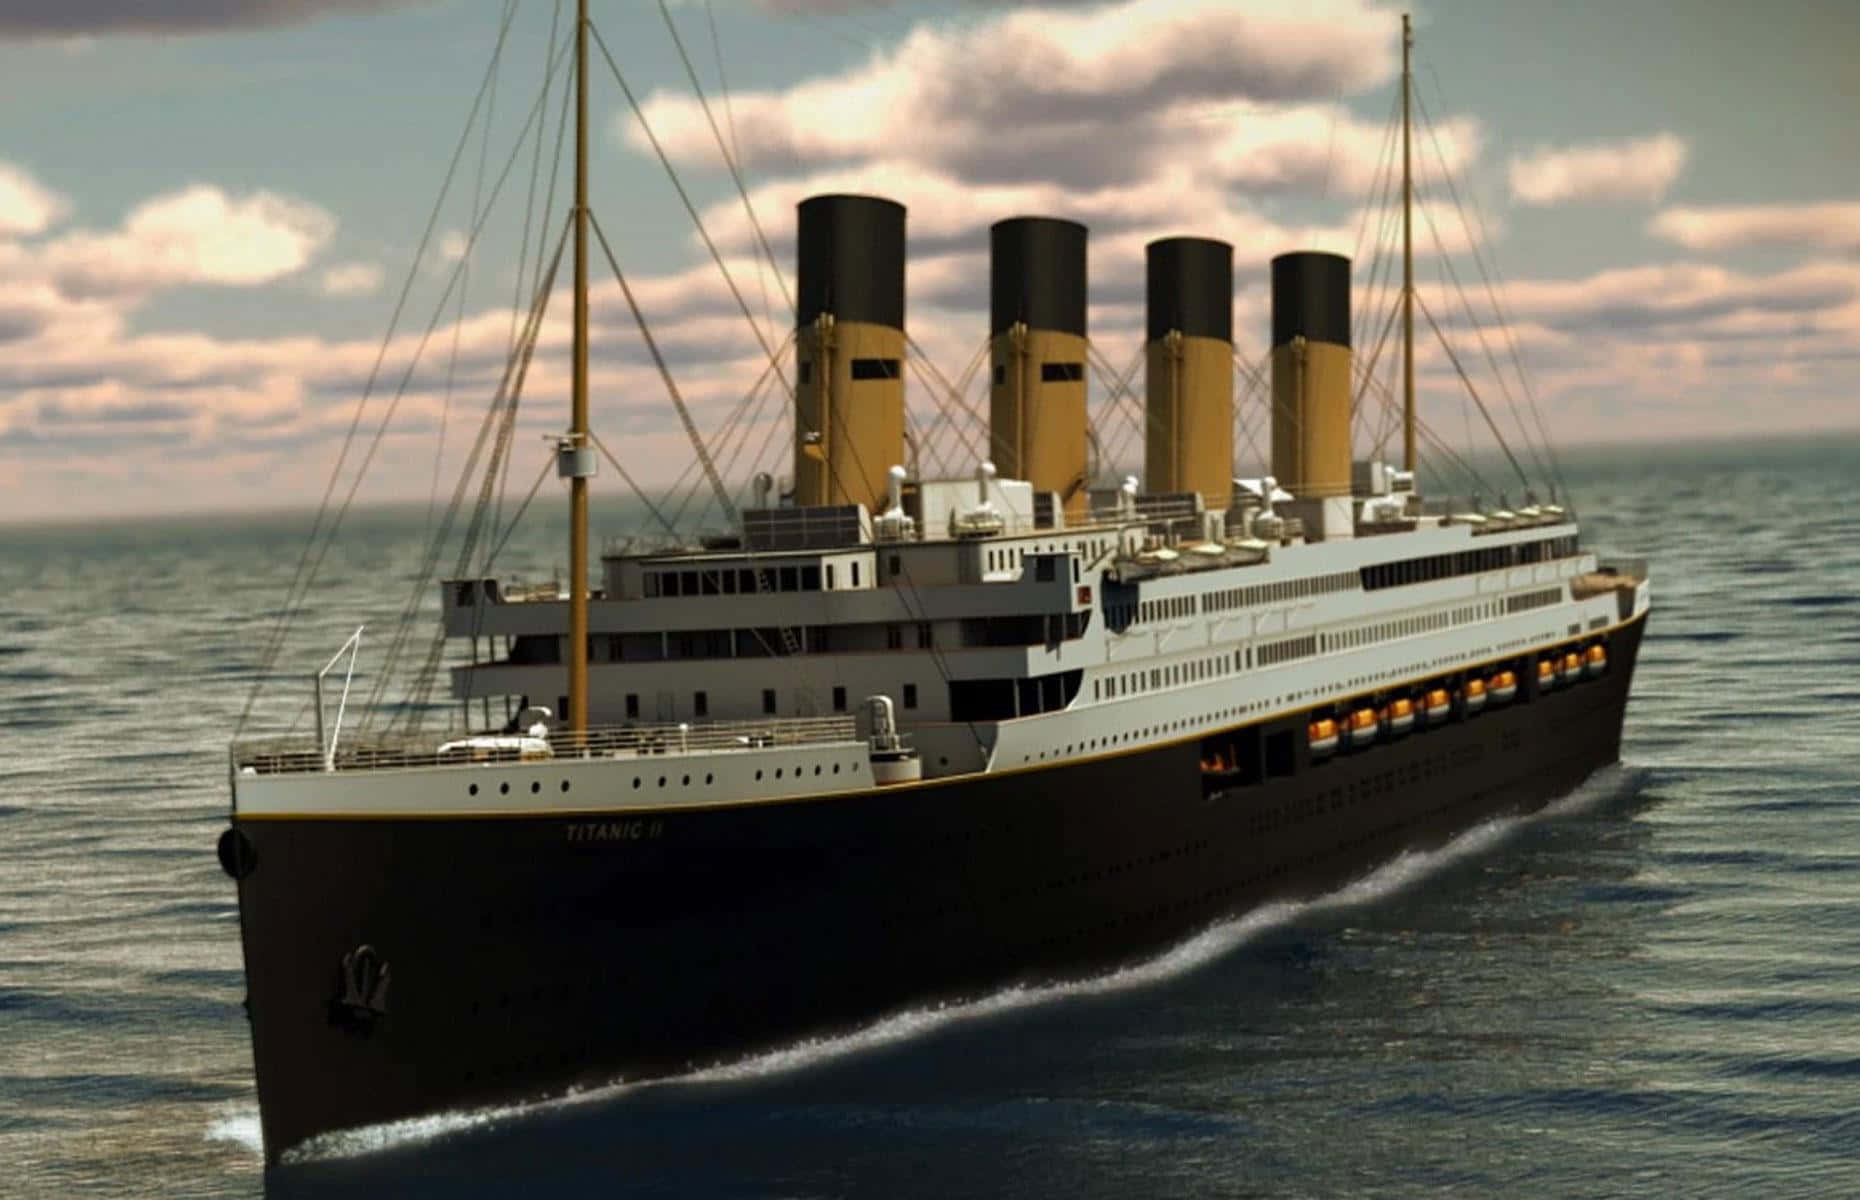 The tragic fate of the Titanic looms large in the night sky.